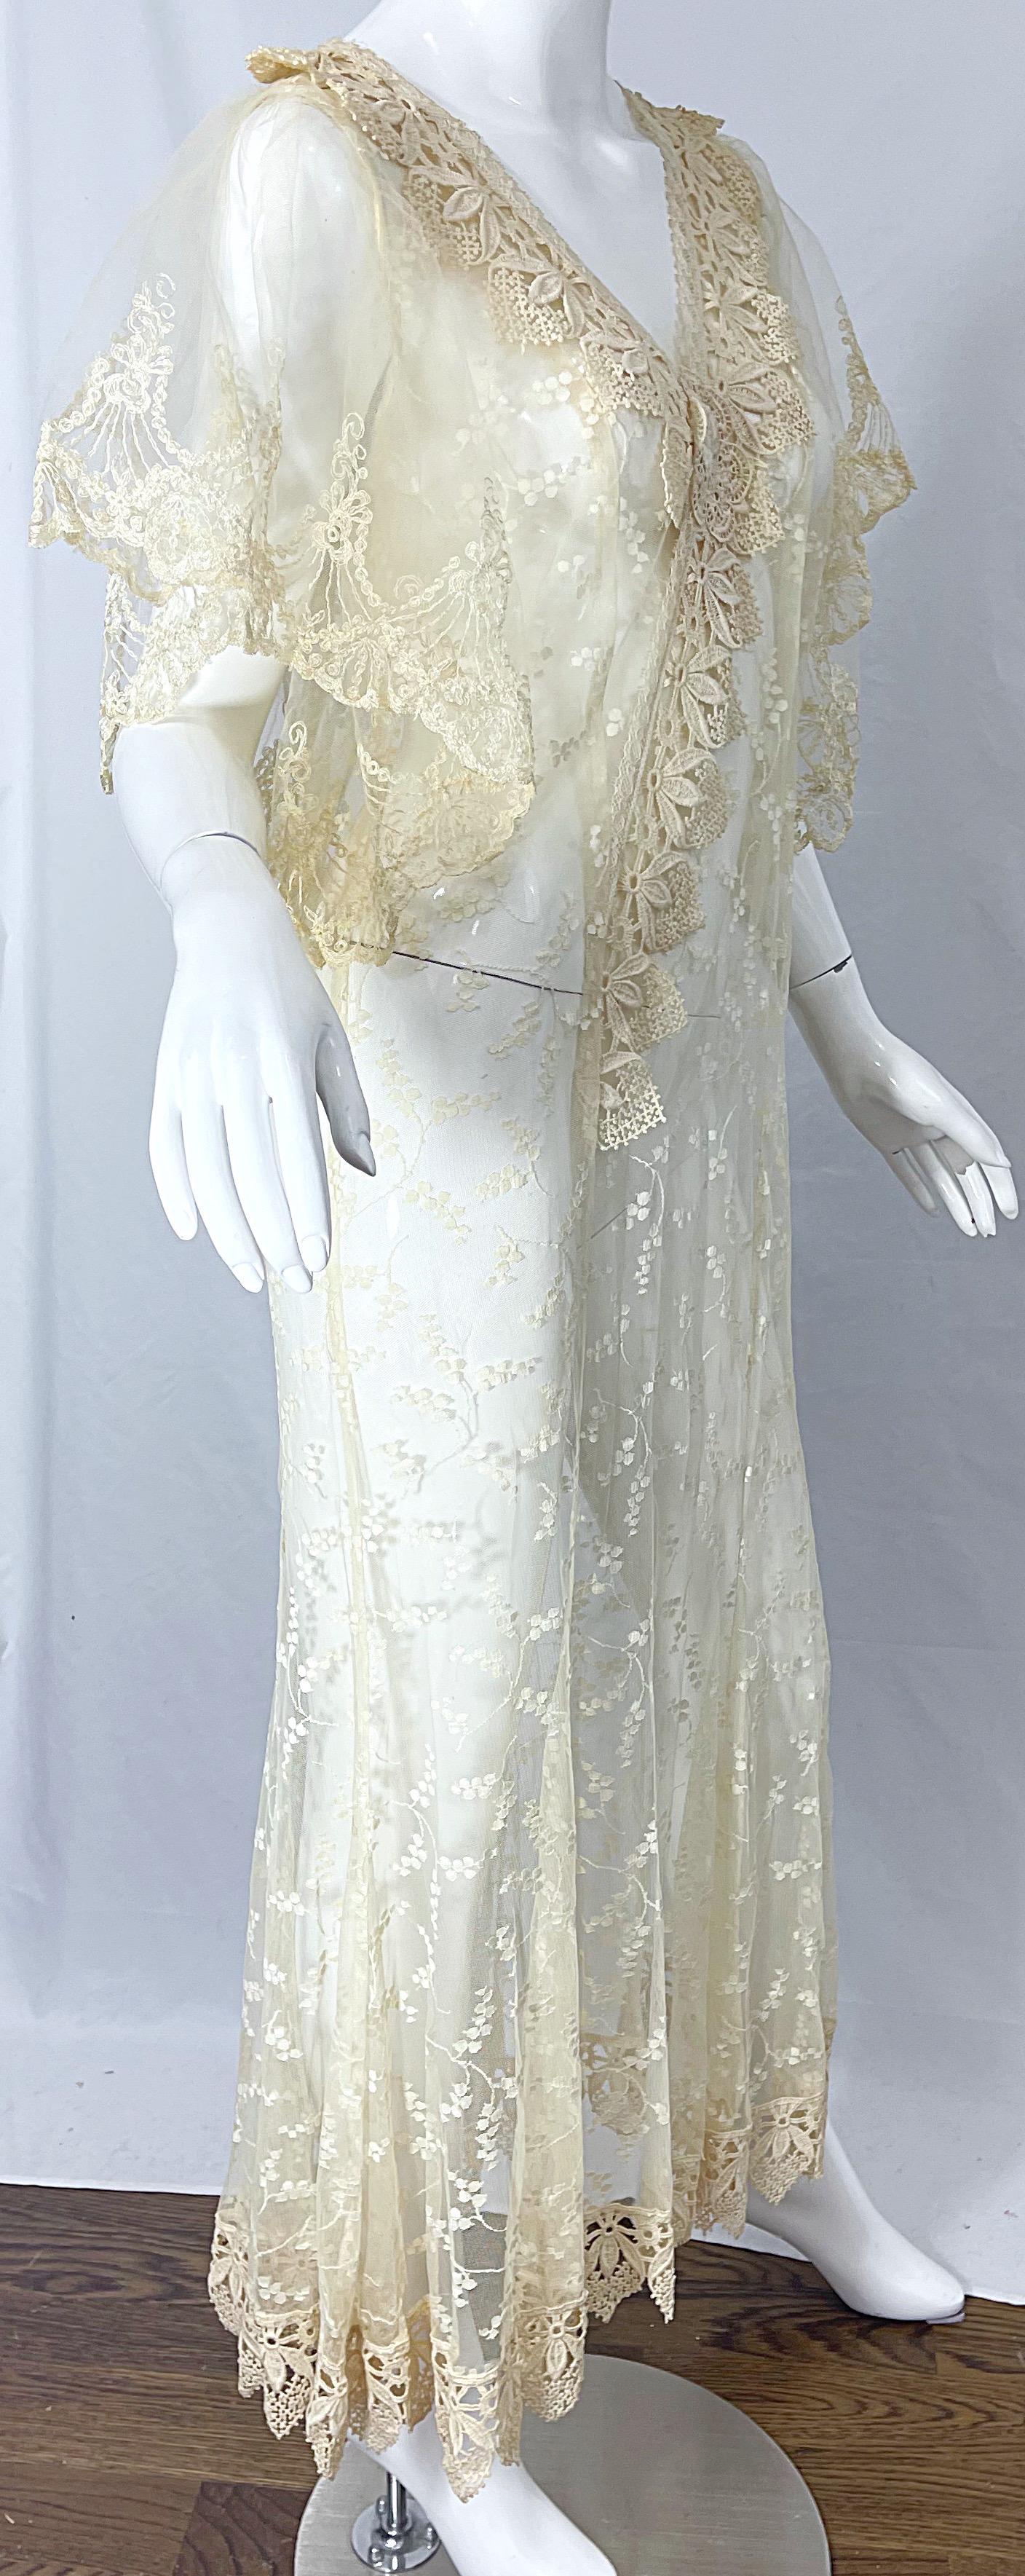 Lorrie Kabala 1980s Ivory Lace Sheer Size 8 Vintage 80s Caftan Maxi Dress For Sale 1